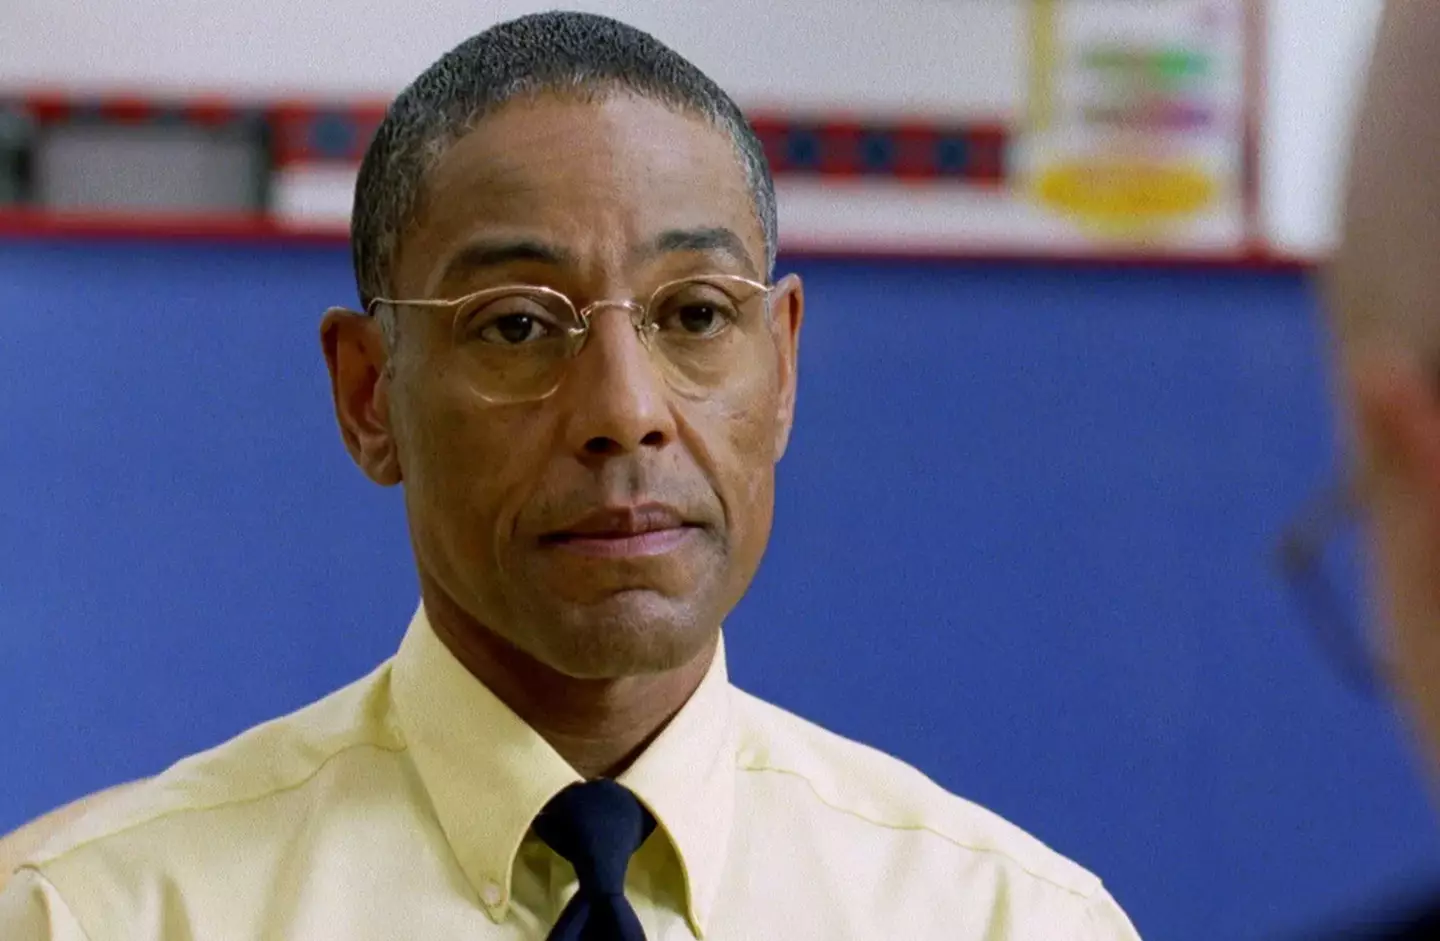 Giancarlo Esposito starred as one of TV's most iconic villains, Breaking Bad's Gus Fring. (AMC)